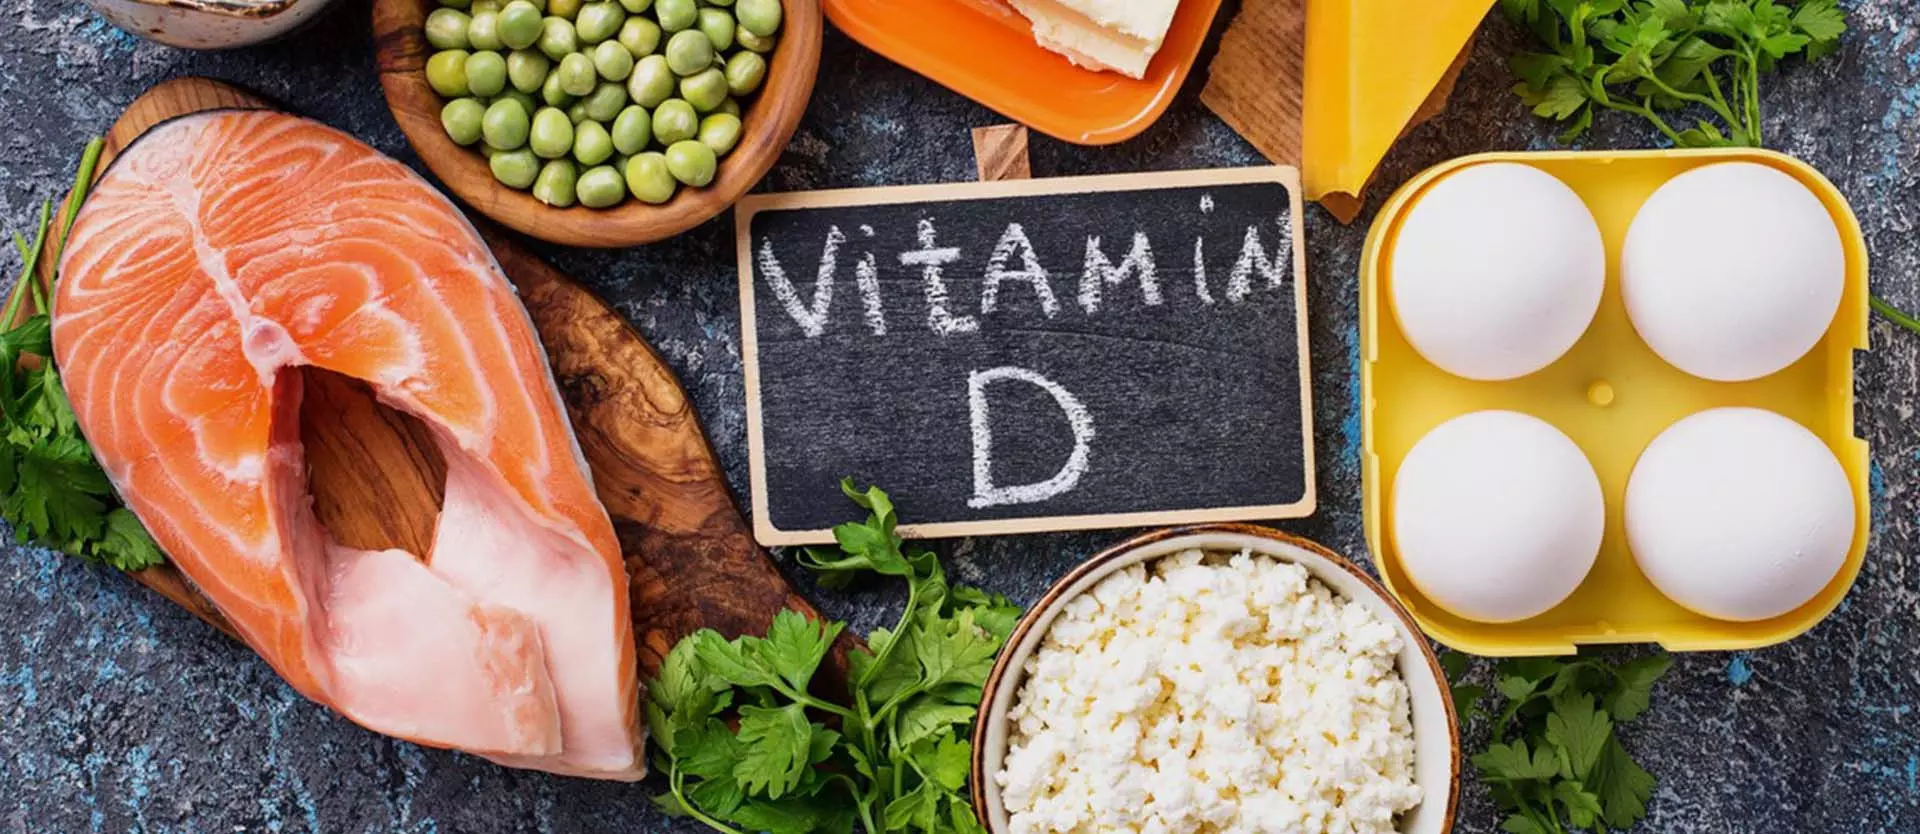 Vitamin D Deficiency and How It Affects Our Health and Hair